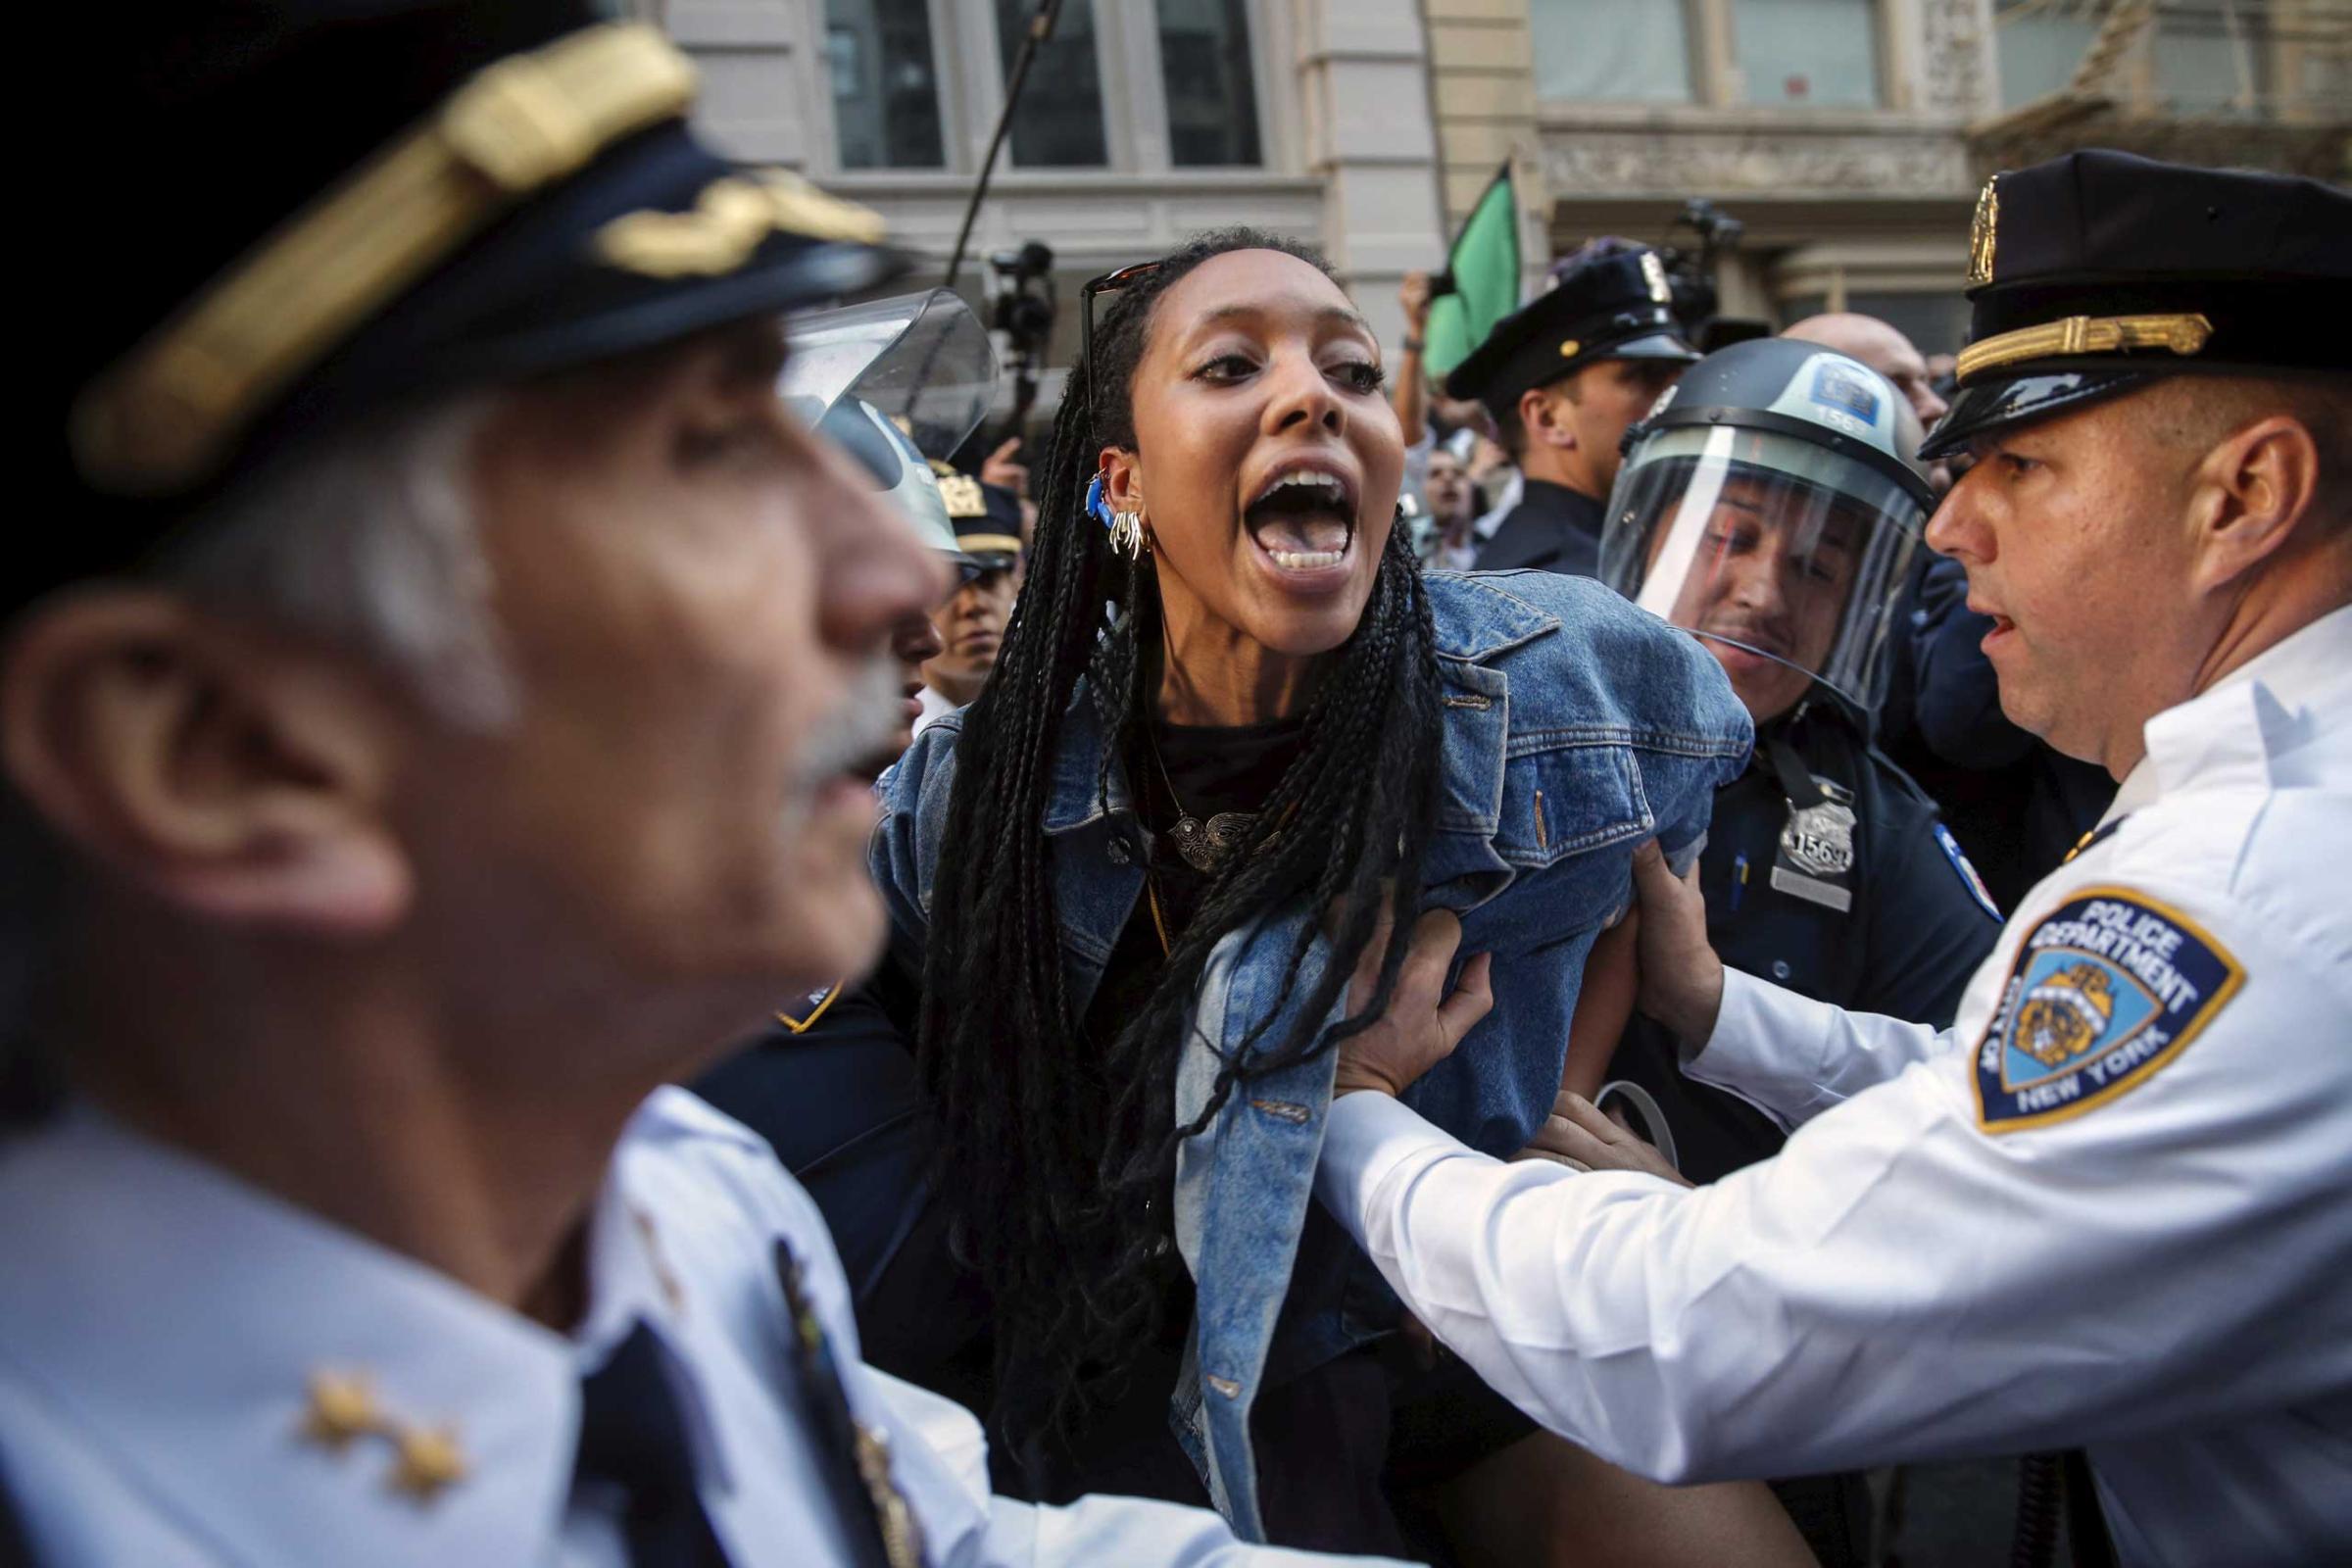 New York Police Department officers detain a protester during a march through the Manhattan borough of New York City on April 29, 2015.